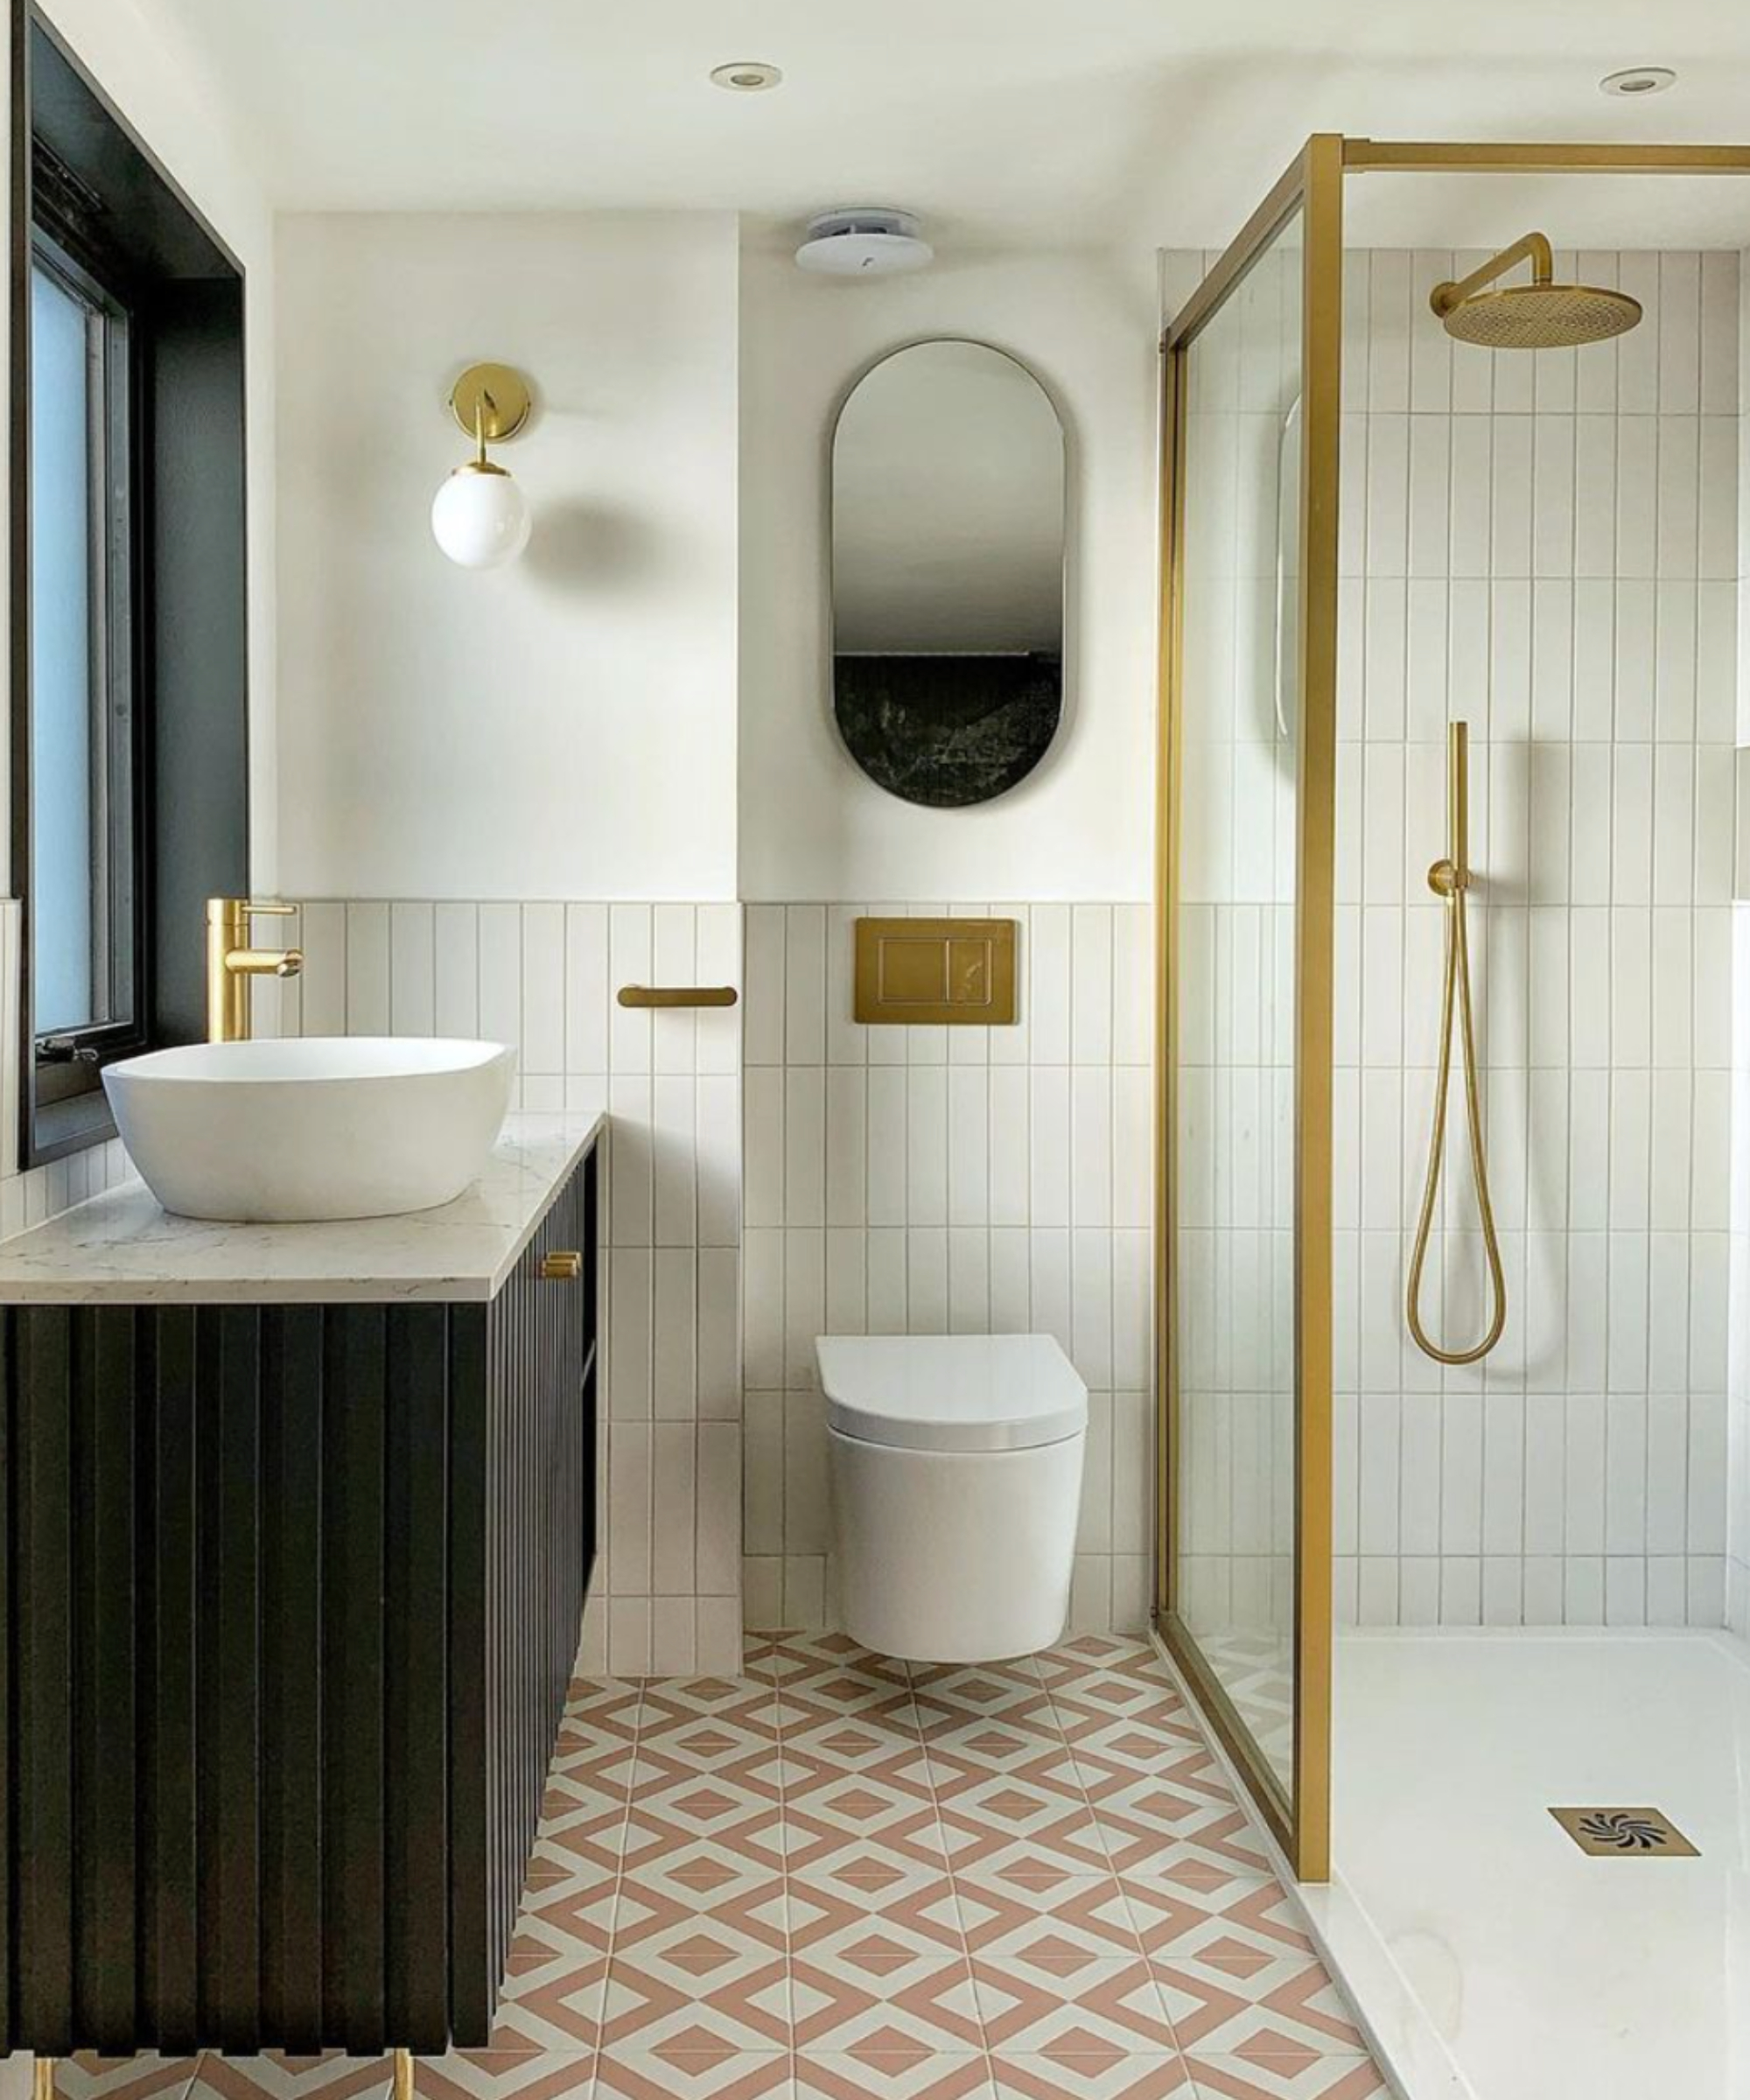 shower room with black vanity, wall hung toilet, gold and glass shower screen, pink floor tiles and white wall tiles